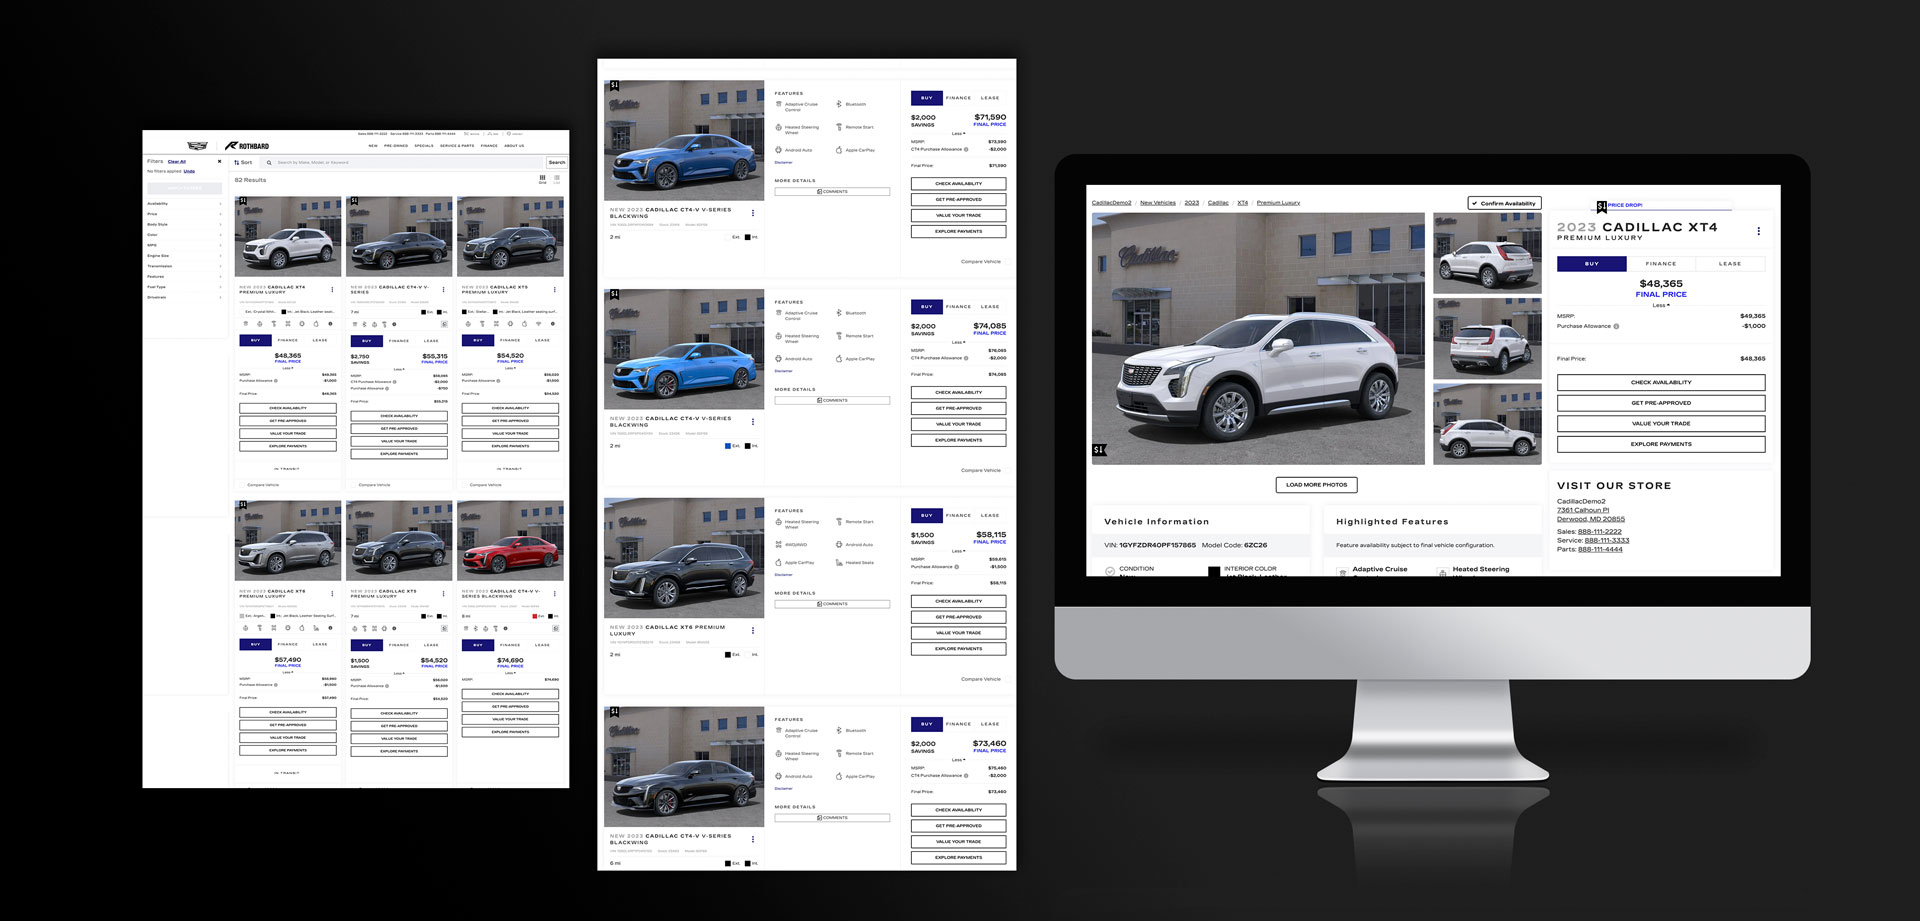 Cadillac Rebranded Search Result and Detail Page